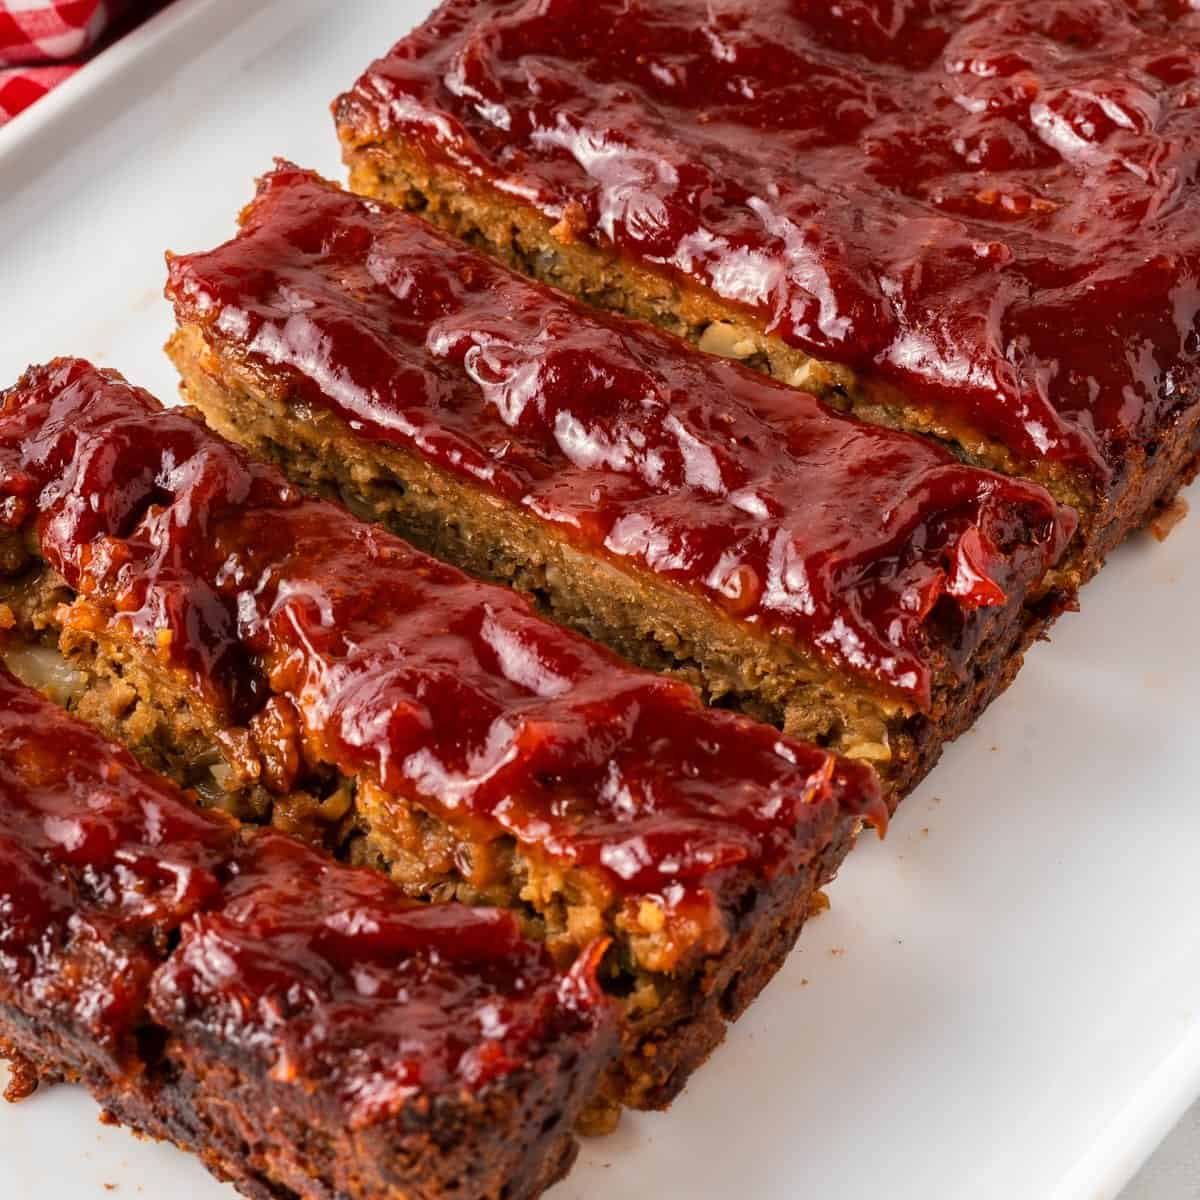 meatloaf cut into slices